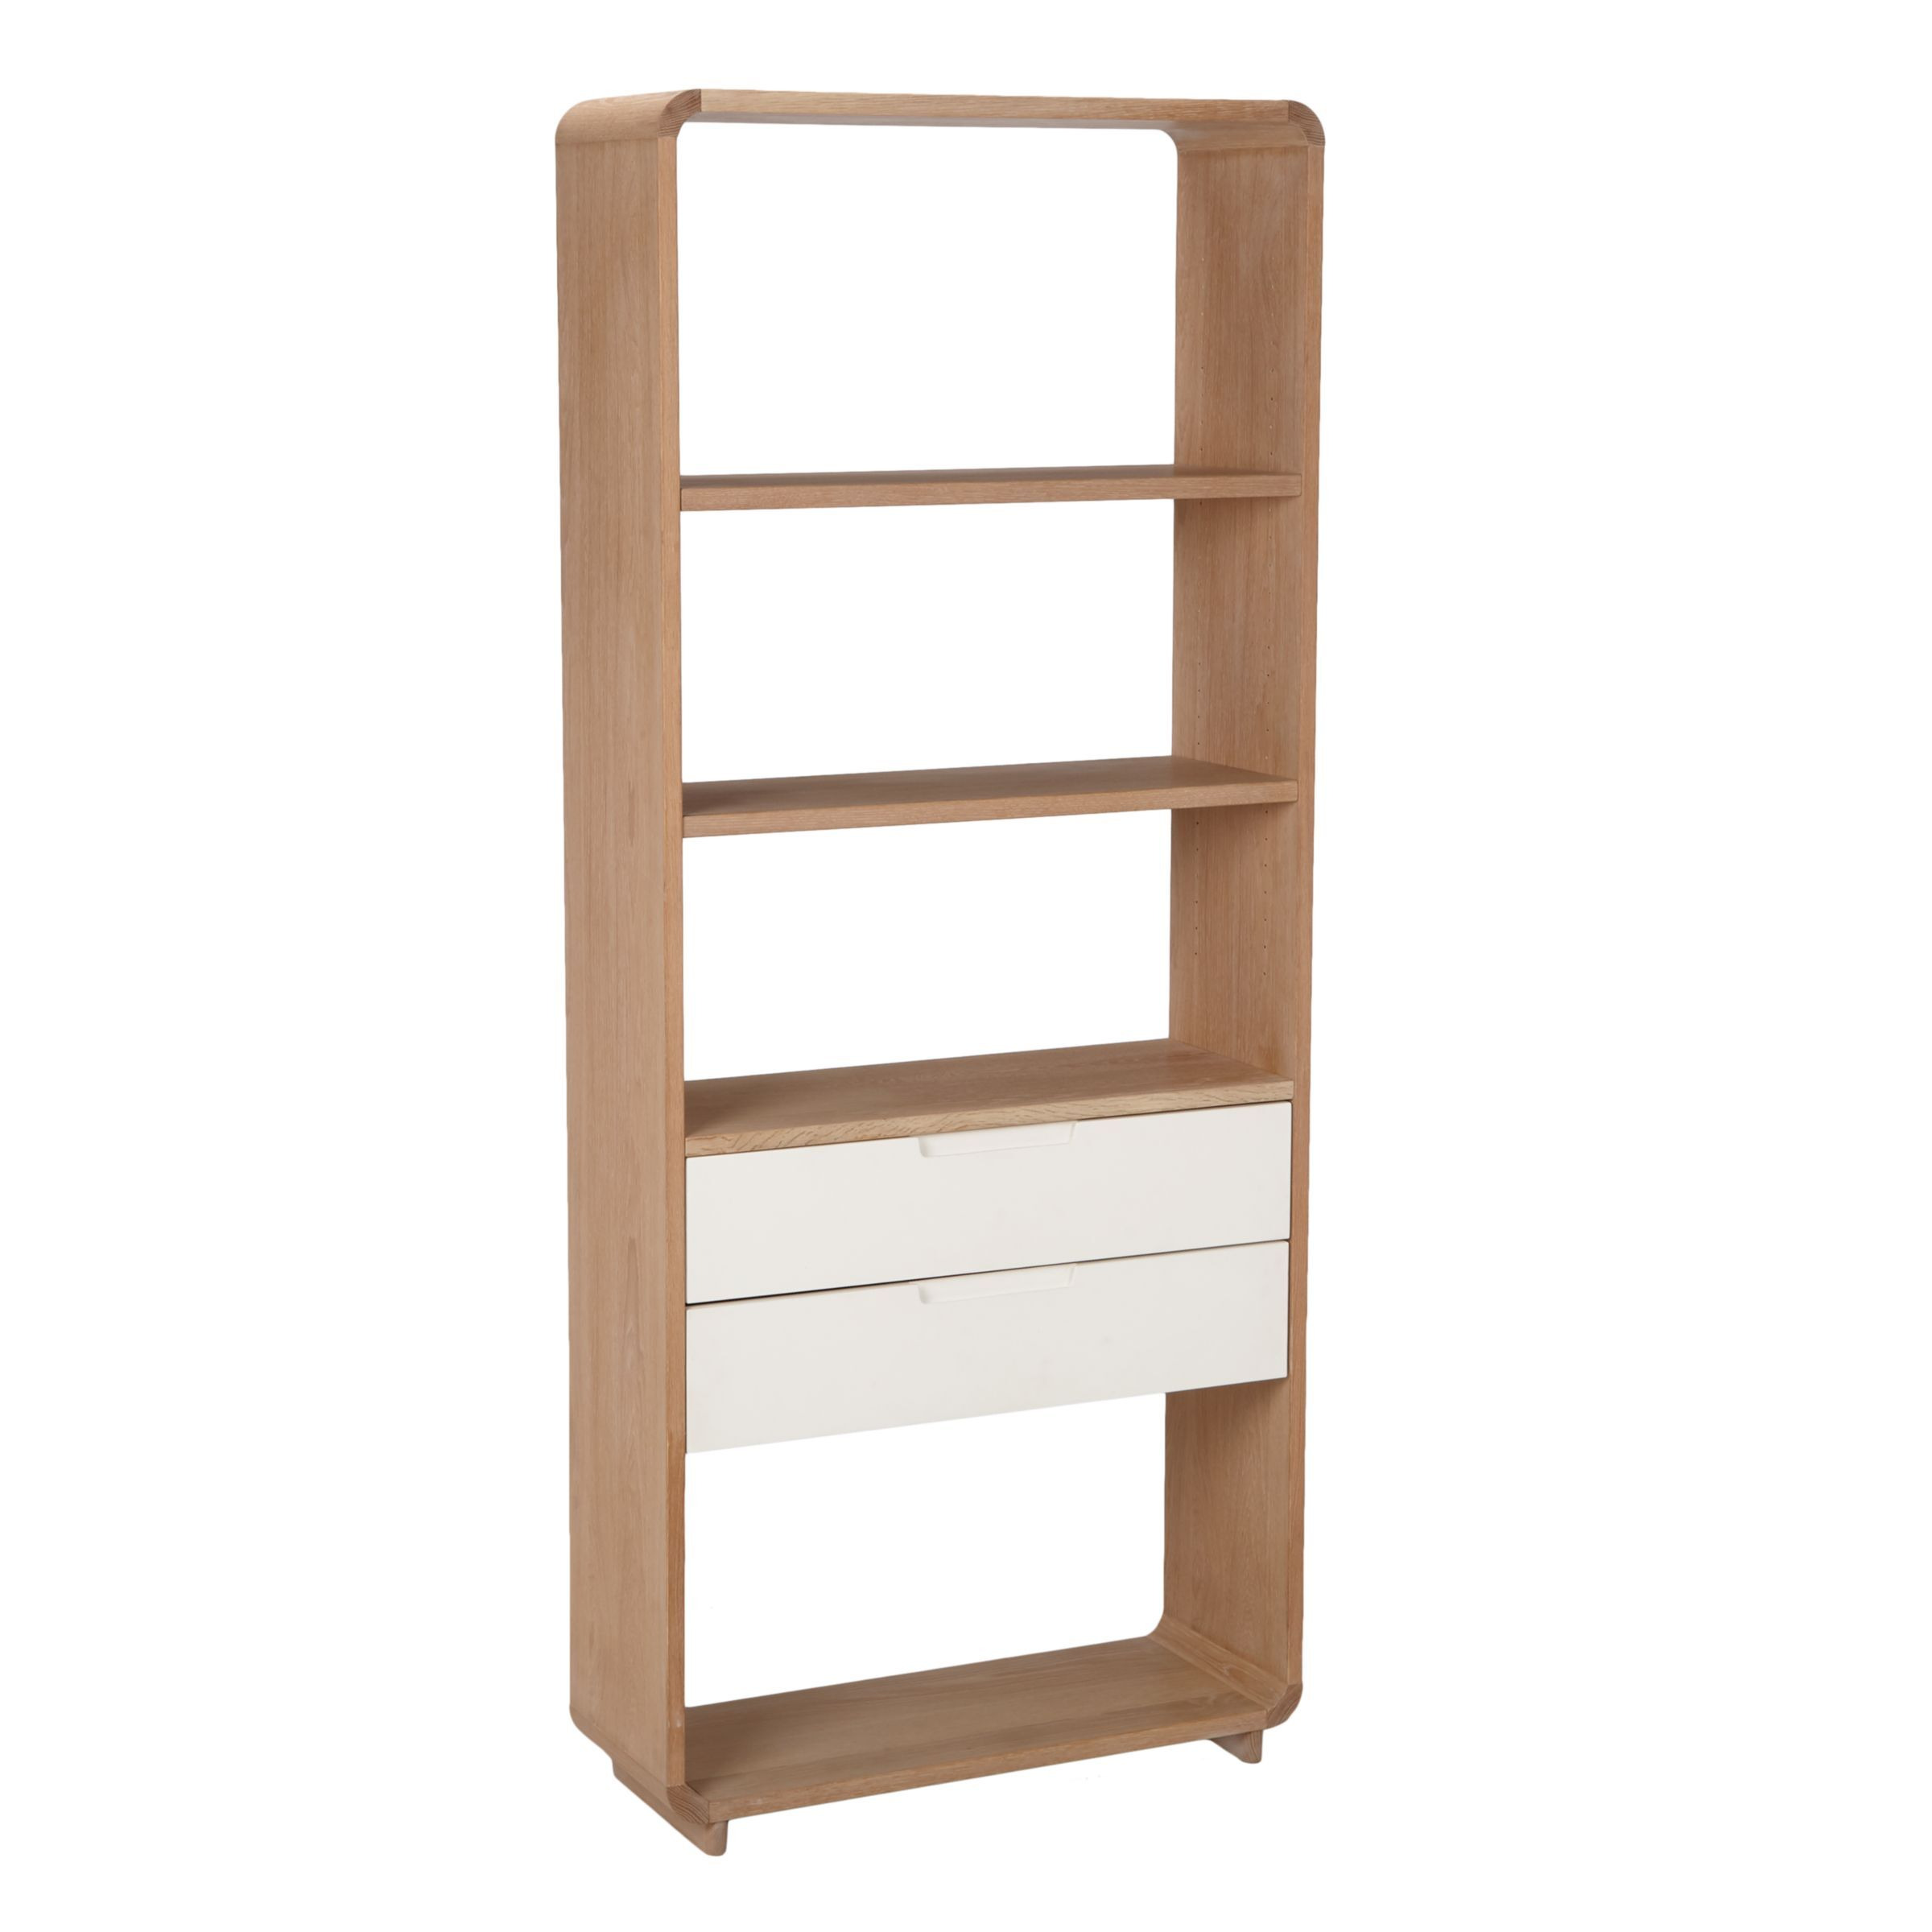 Ebbe Gehl for John Lewis Mira Wide 2 Drawer Bookcase - image 1